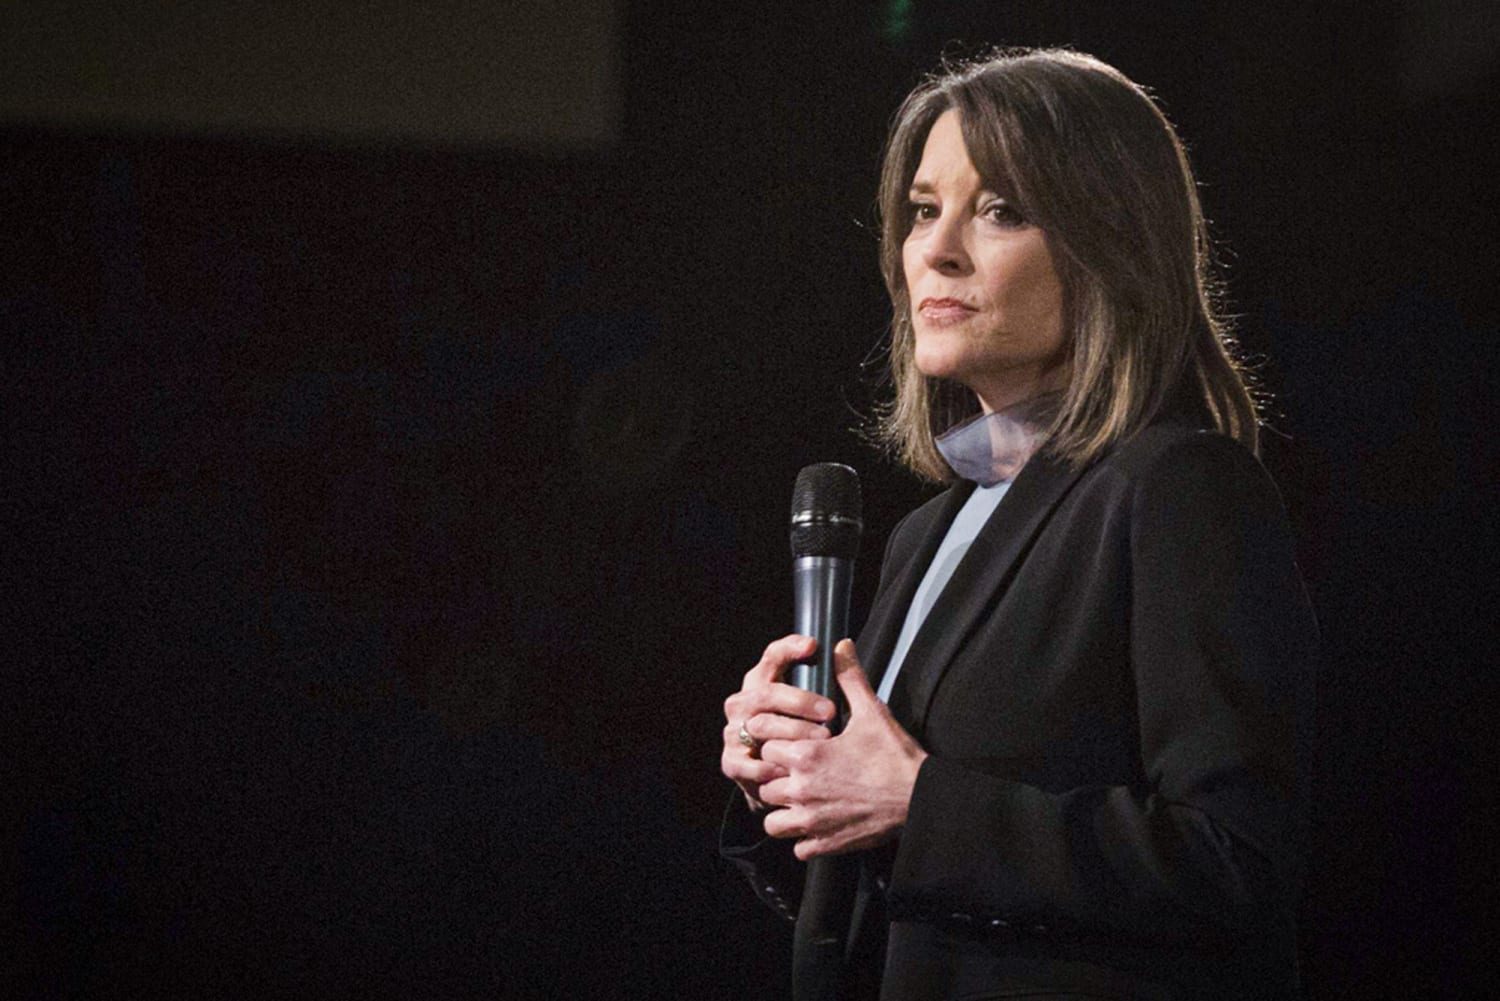 Marianne Williamson Relaunches Presidential Campaign Amidst Rising Fascism Concerns - Archyde